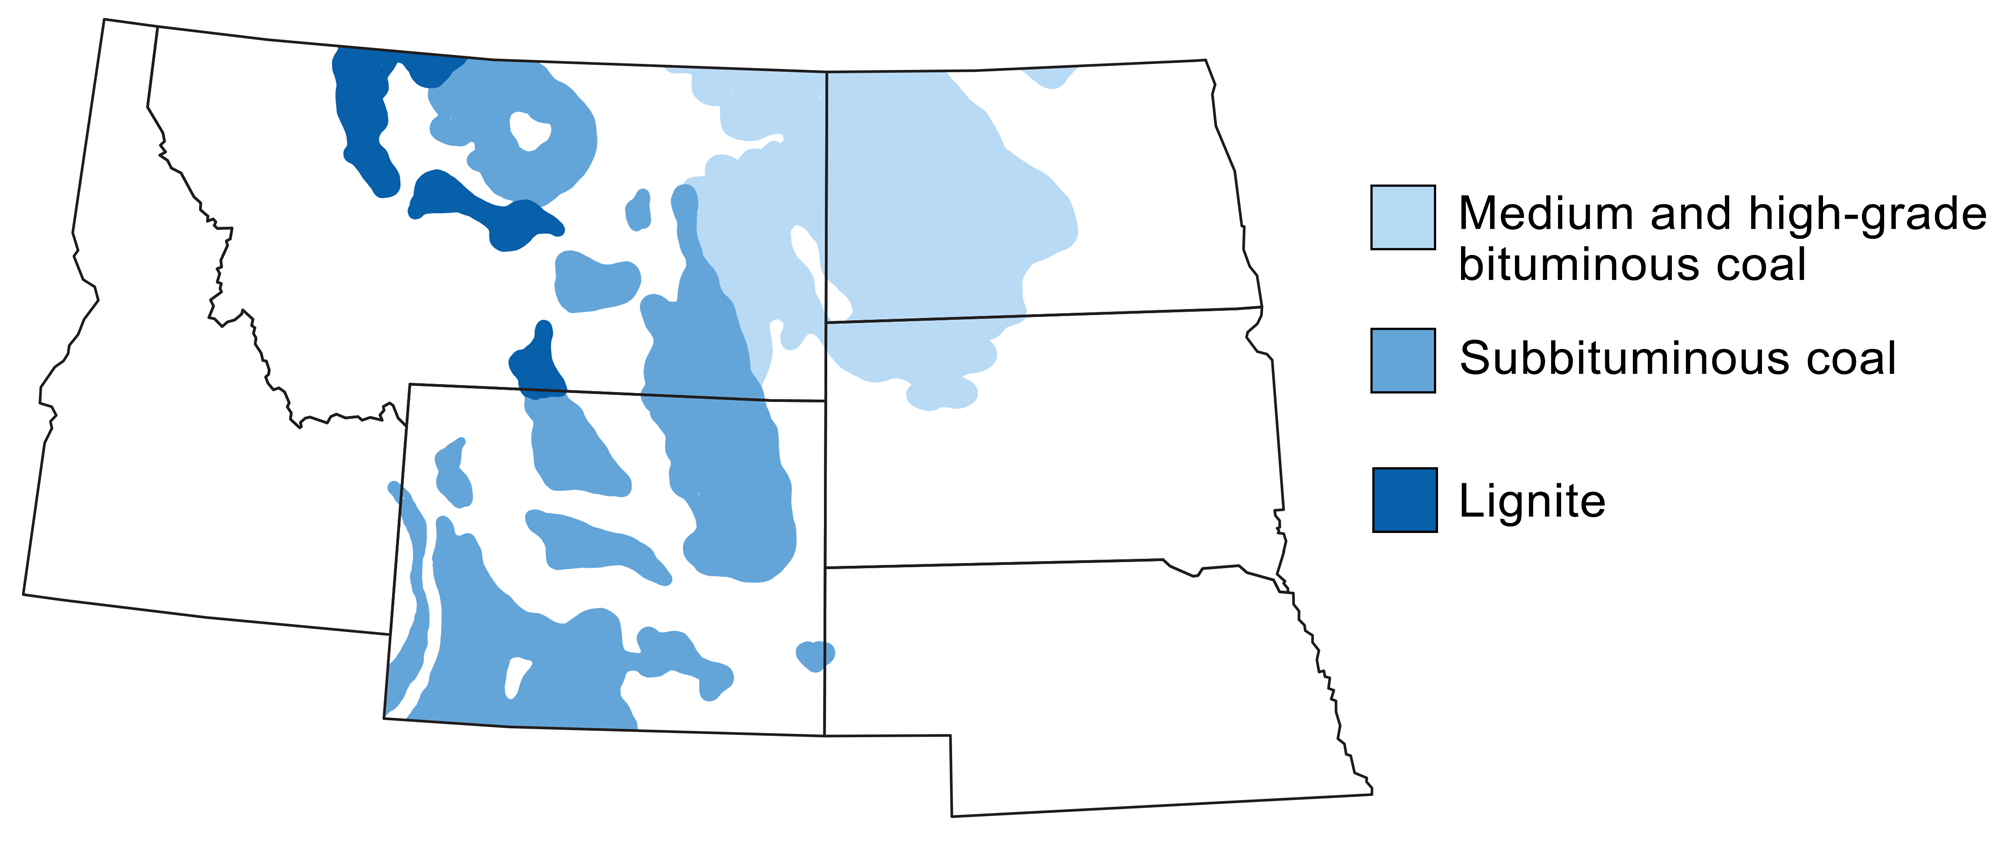 Map of the northwest-central region with state boundaries outlined in black. Major coal deposits are indicated by shades of blue. Bituminous coal (light blue) is found in eastern Montana and the western Dakotas. Lignite (dark blue) is found in north-central to south-central Montana. Subbitumious coal (medium blue) is found in Montana, Wyoming, and a very small part of western Nebraska.